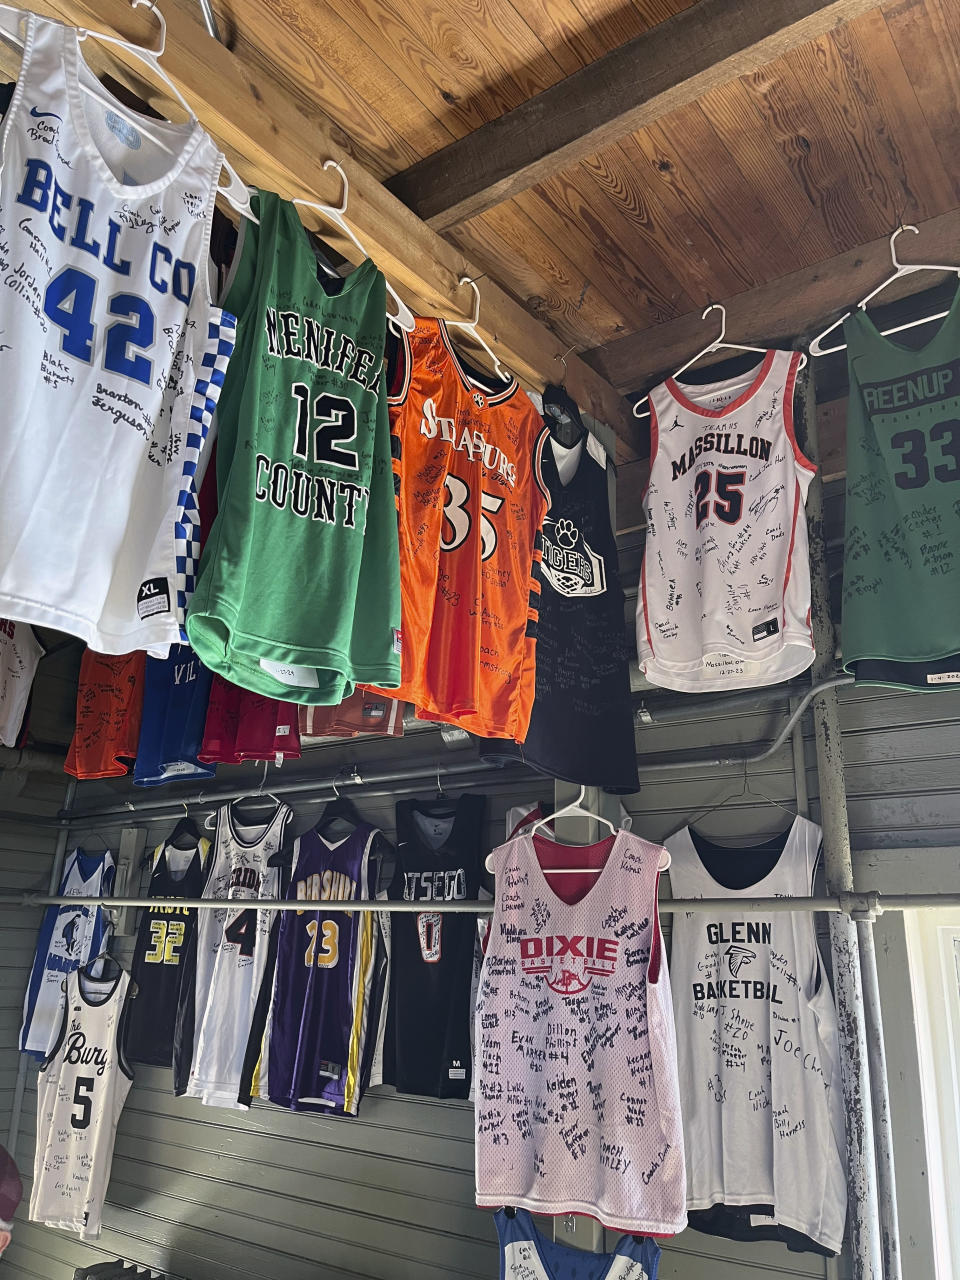 Signed jerseys left behind by high school teams hang at The Hoosier Gym in Knightstown, Ind., Monday, Feb. 19, 2024. The gym where many scenes from the movie “Hoosiers” was filmed in the mid-1980s plays host to dozens of high school games each year as fans still flock to the site. (AP Photo/Tim Reynolds)